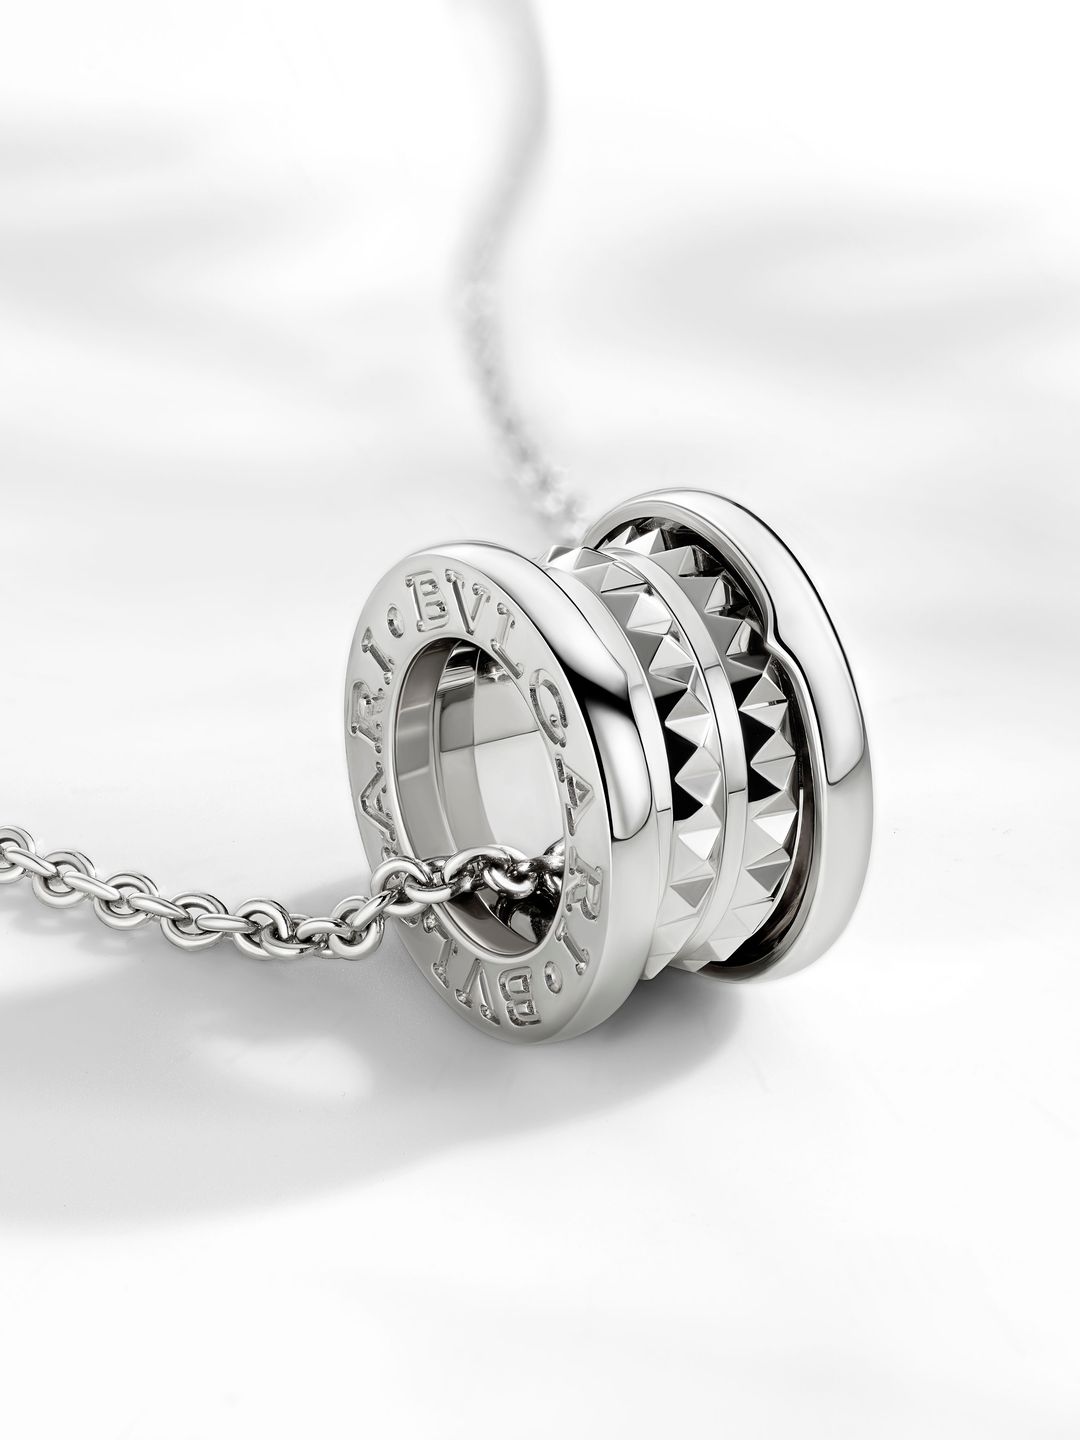 Bulgari's newest necklace in collaboration with Save the Children